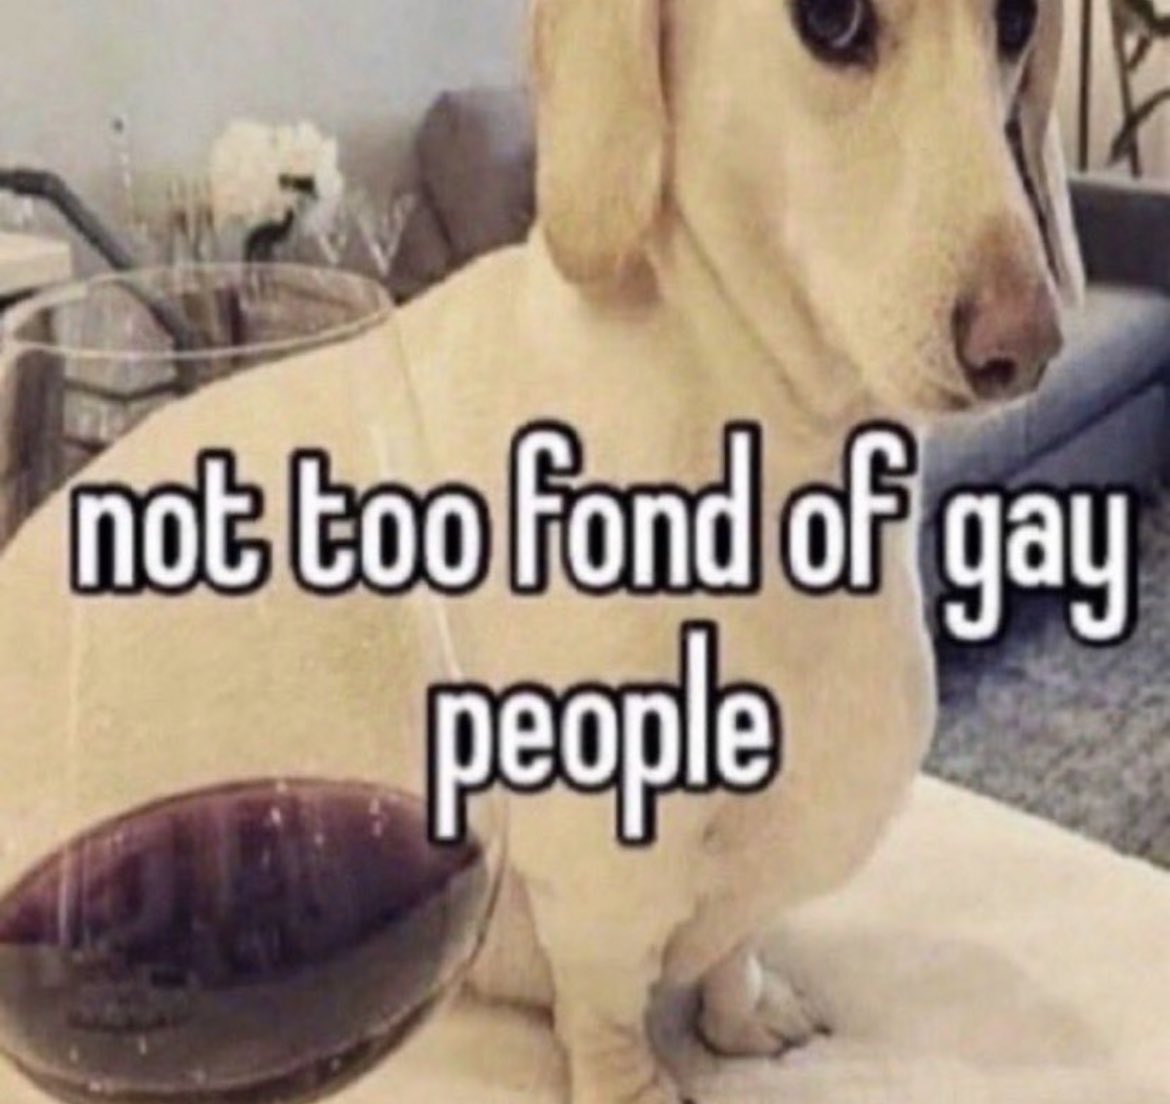 that homophobic dog meme with text:not too found of gay people